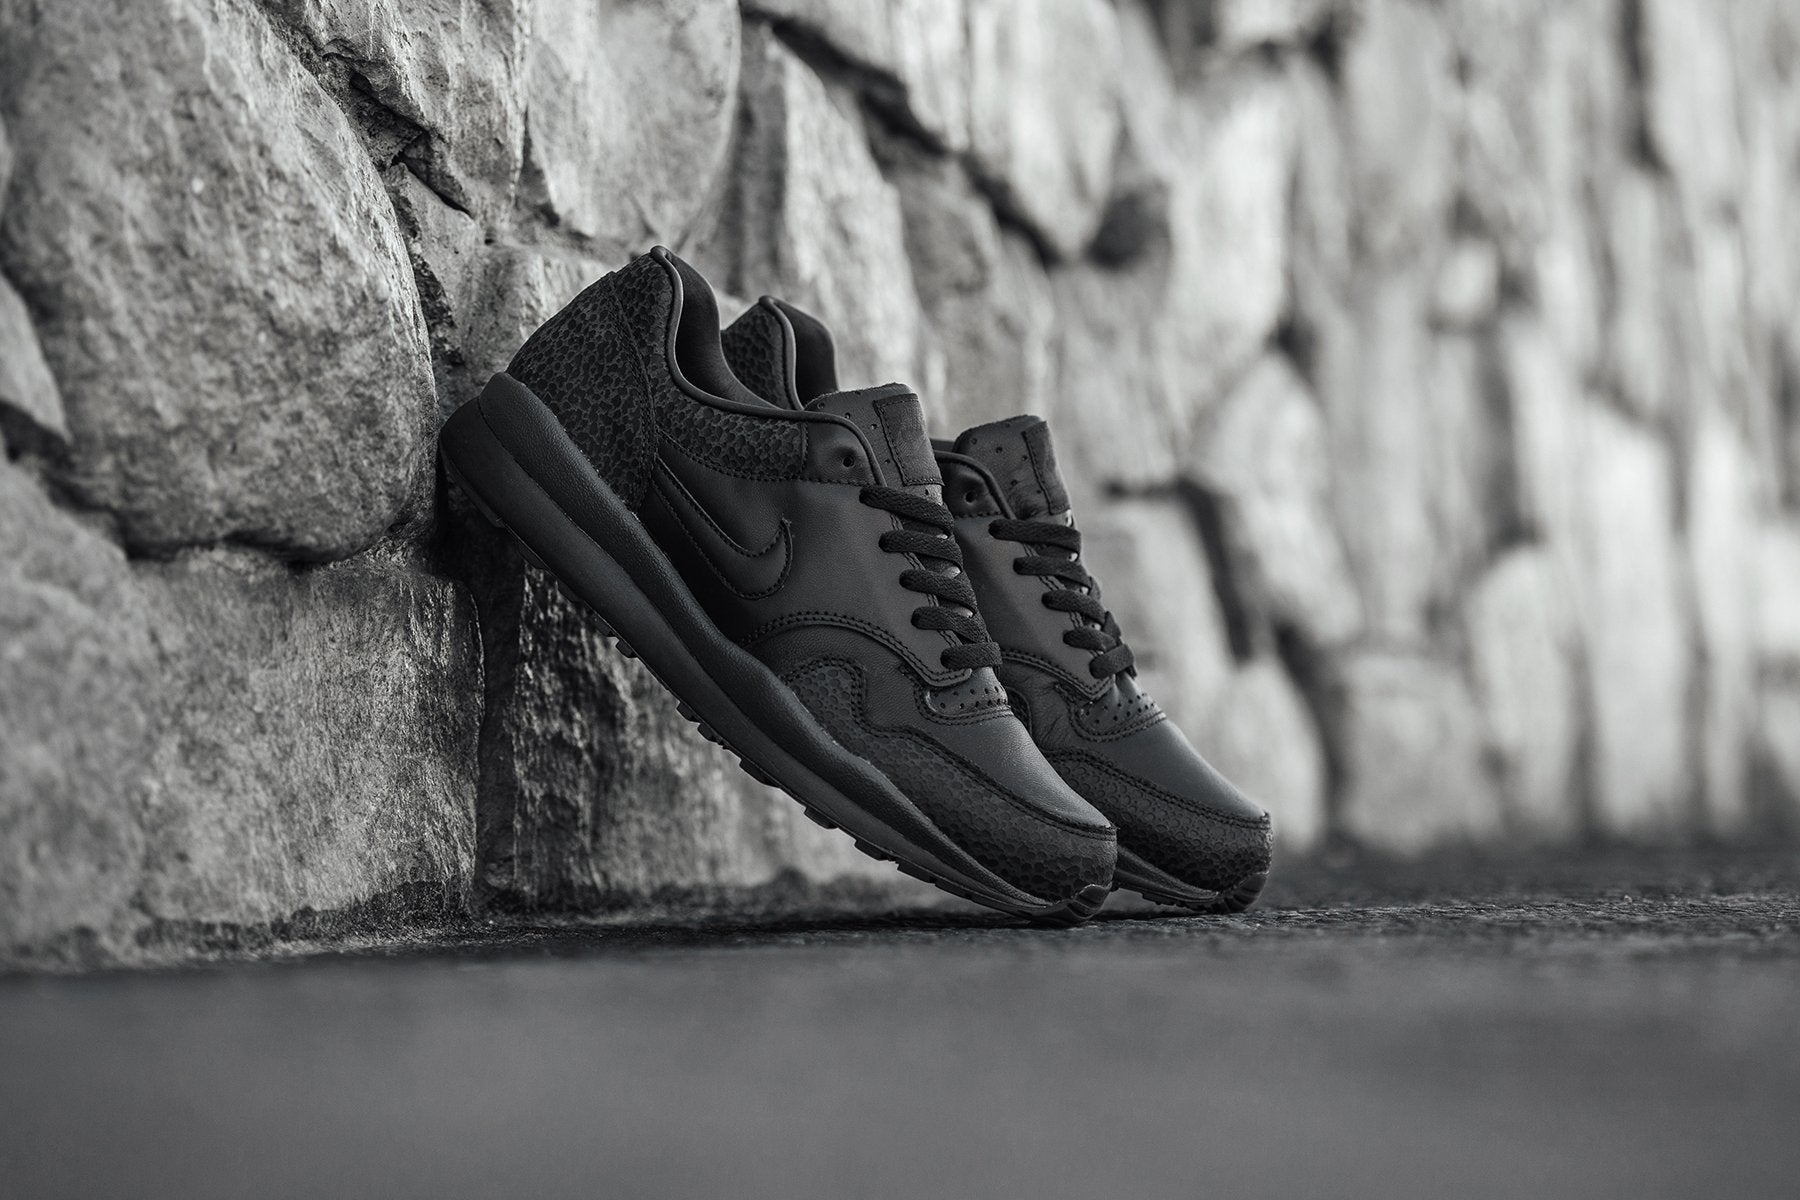 Productie Thriller Triviaal Nike Air Safari QS "Black/Anthracite" Available Now – Feature